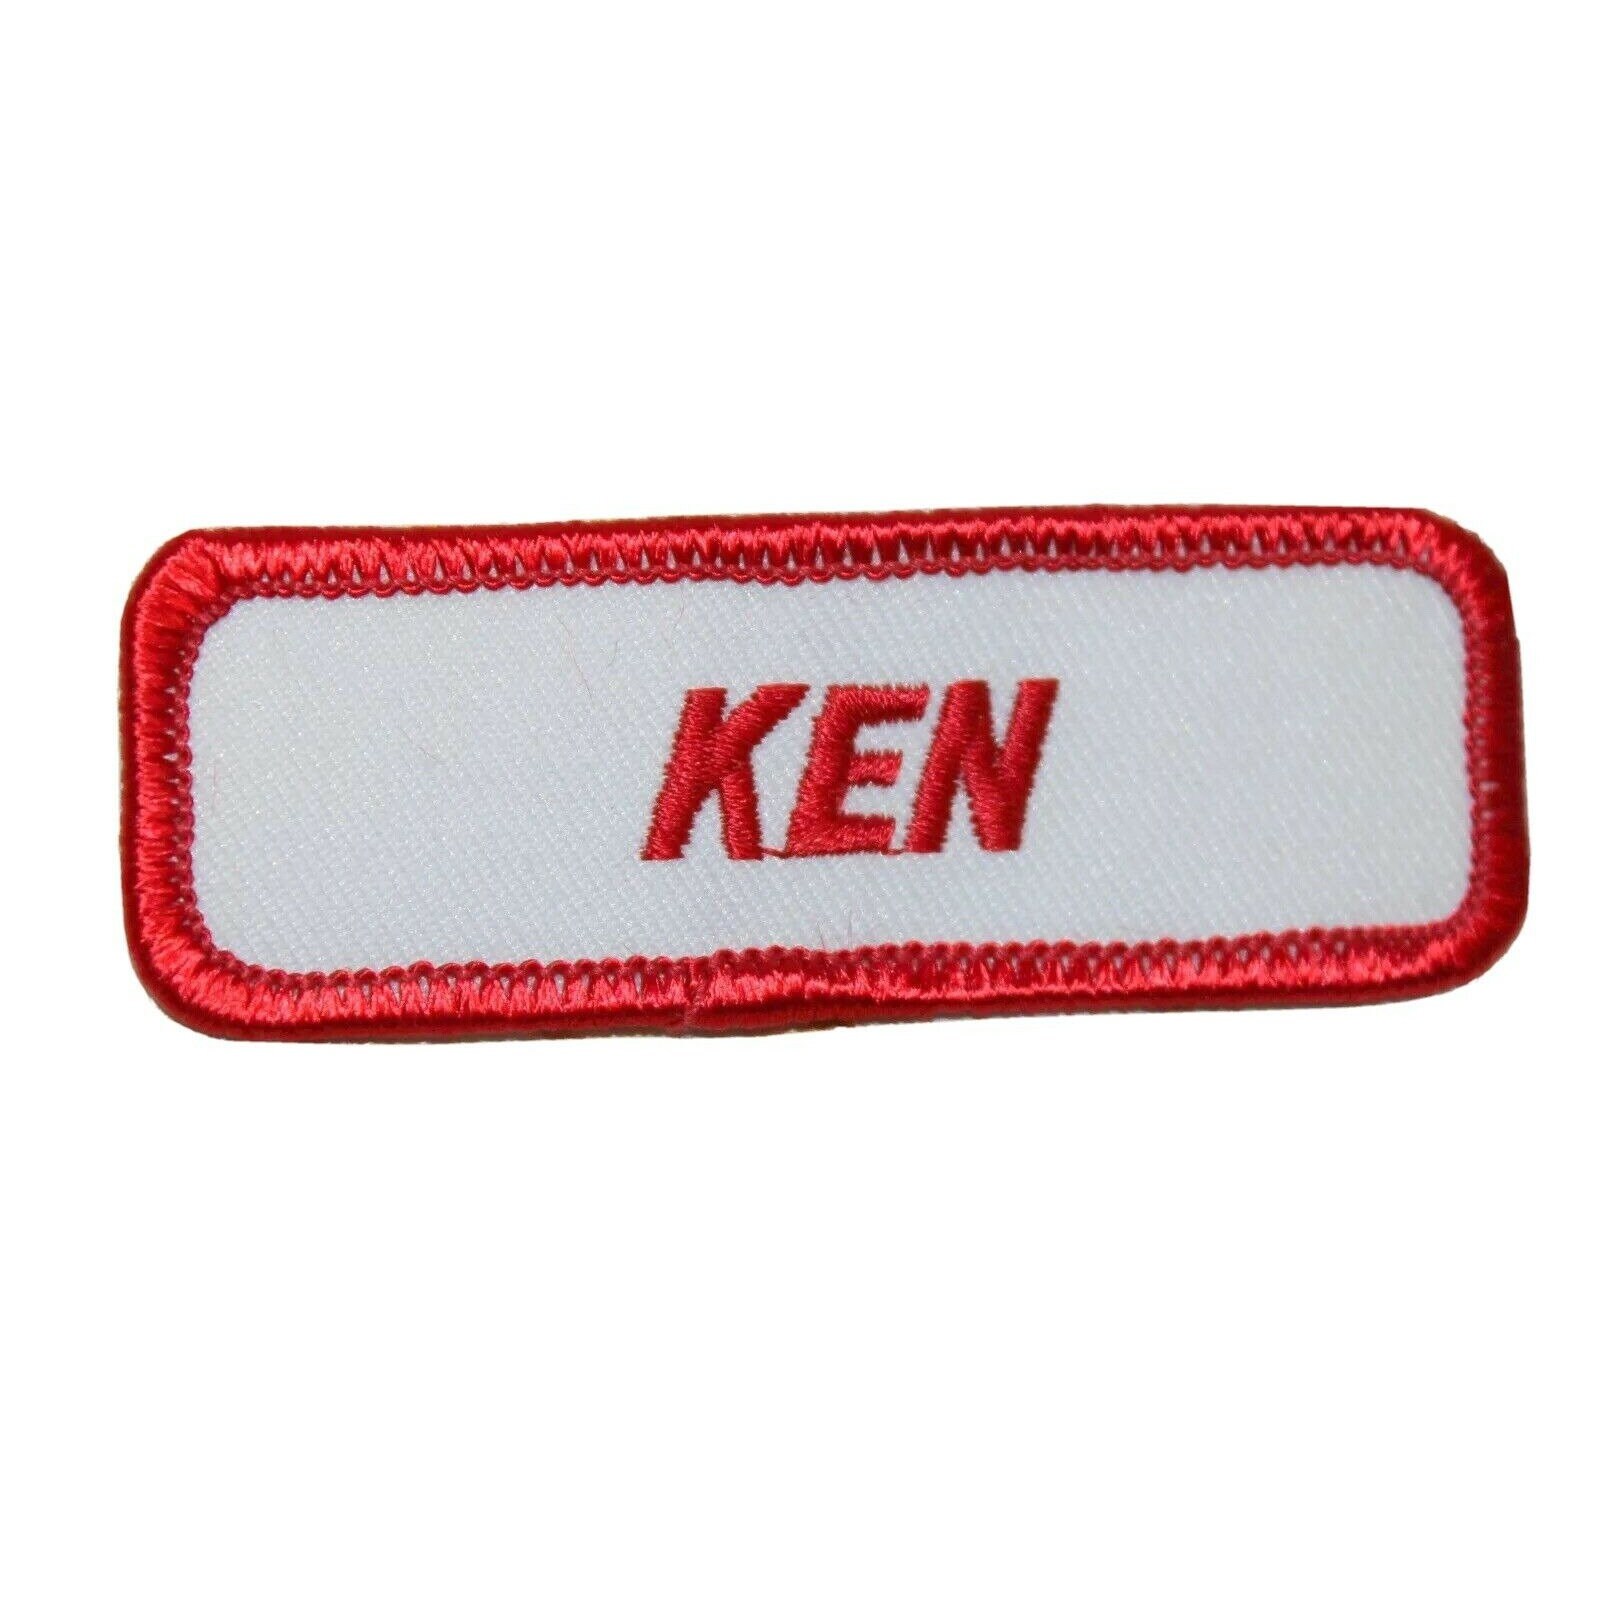 Set of 2 Barbie and Ken Name Tags Embroidered Iron on Uniform Applique  Patch -  Finland